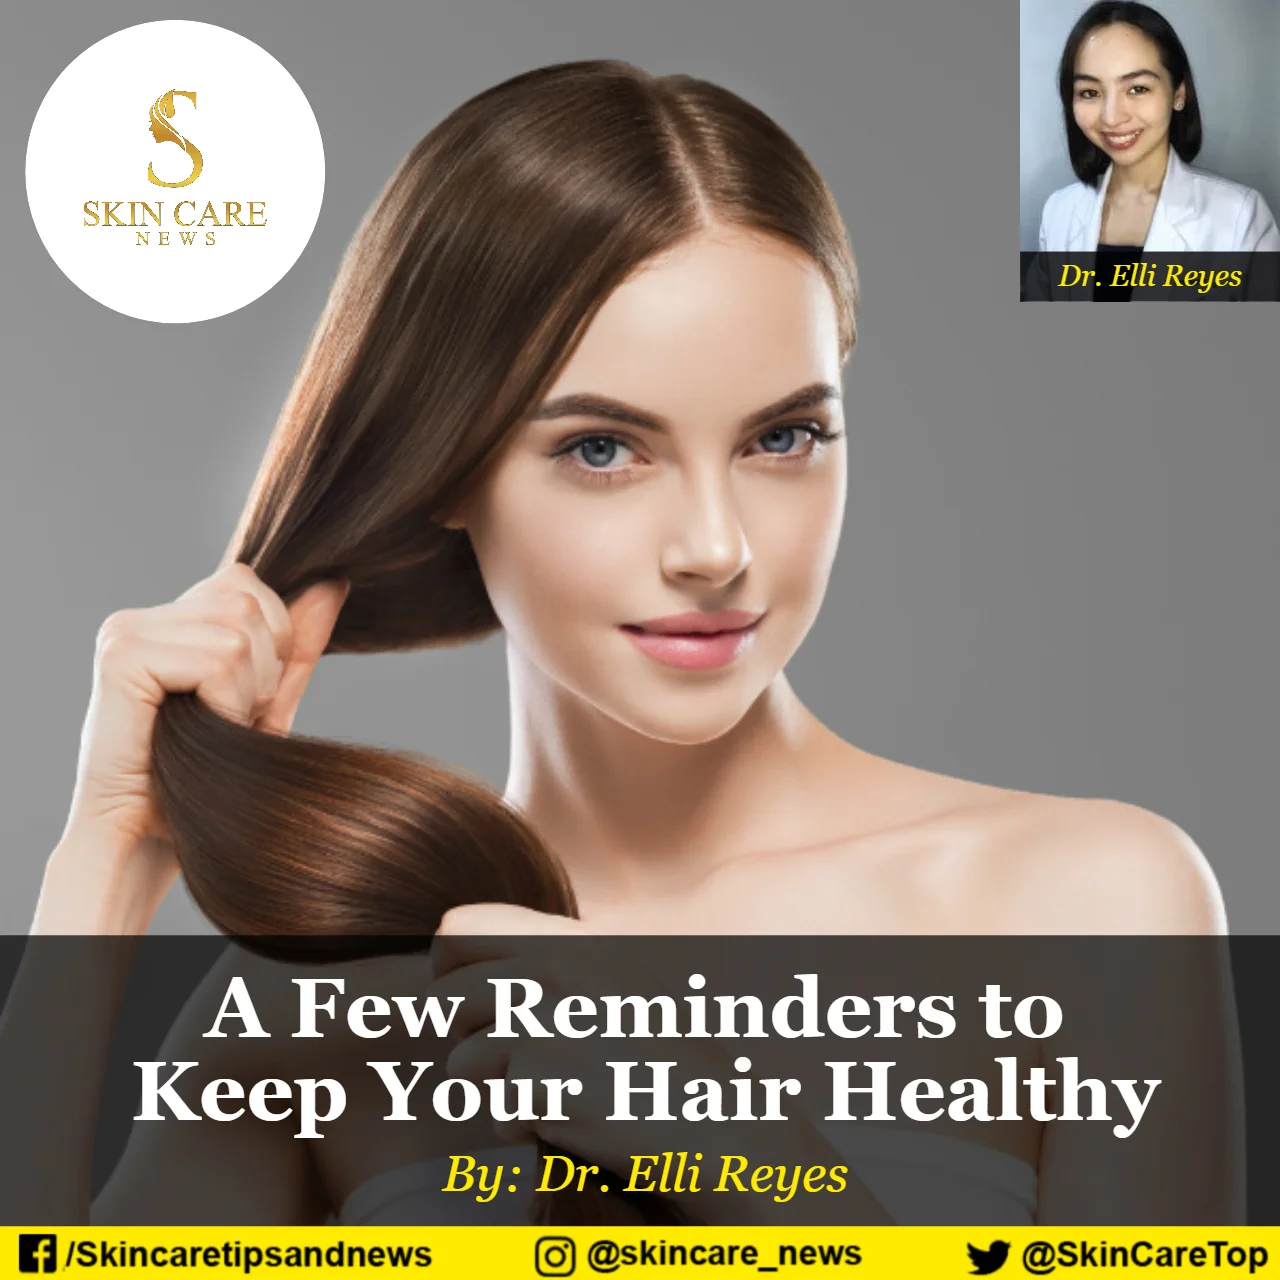 A Few Reminders to Keep Your Hair Healthy